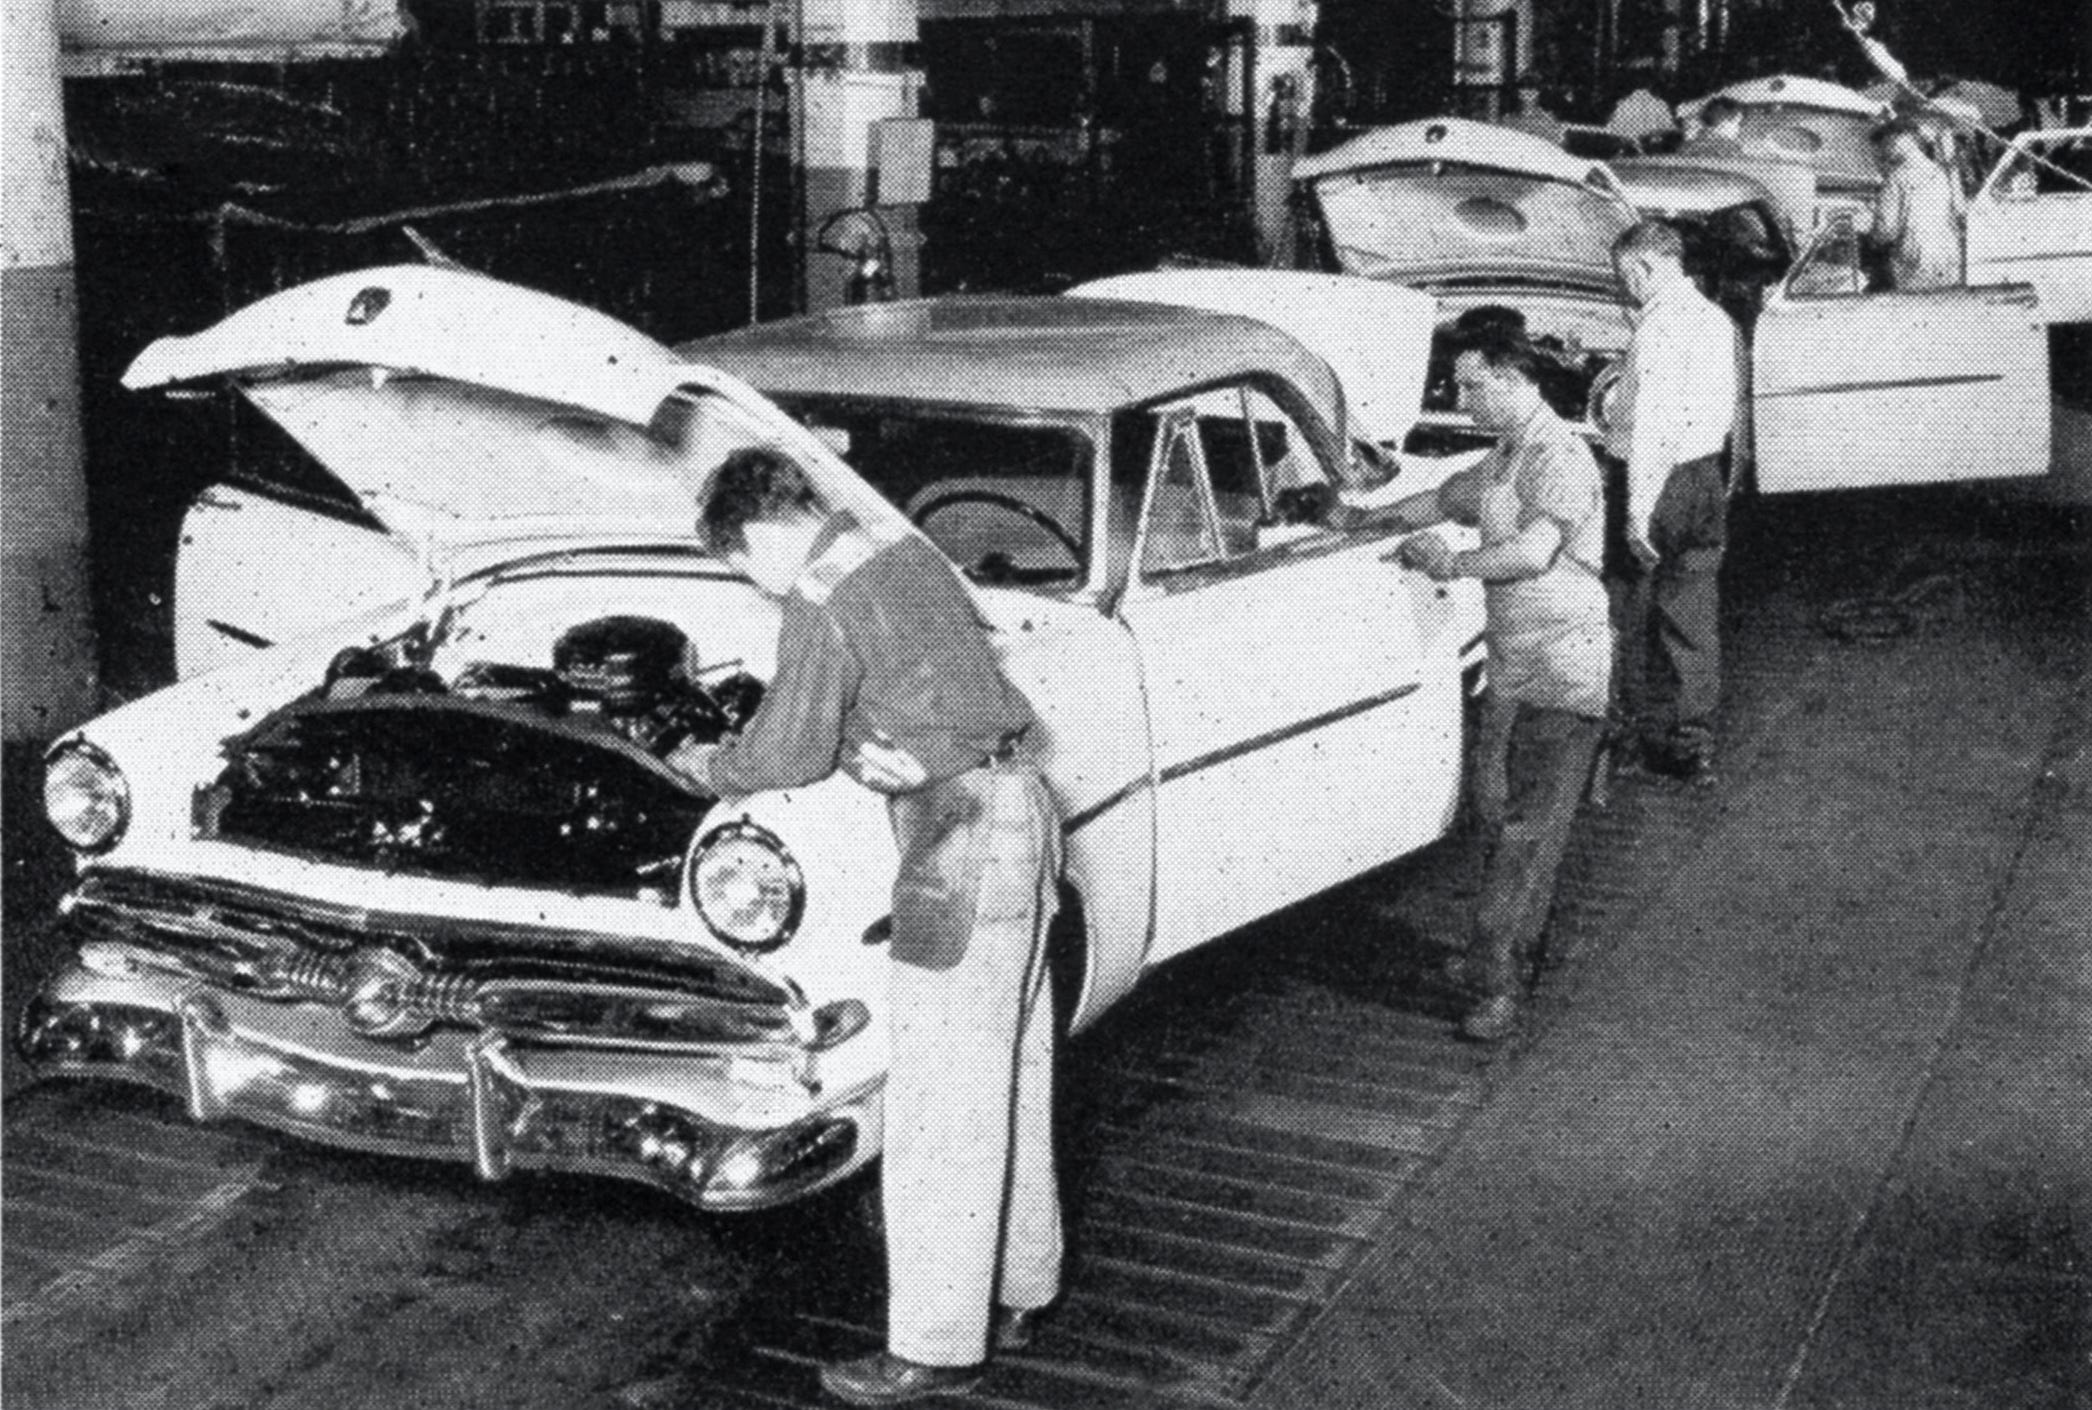 "Ford Assembly Line, 1953" by aldenjewell is licensed under CC BY 2.0 